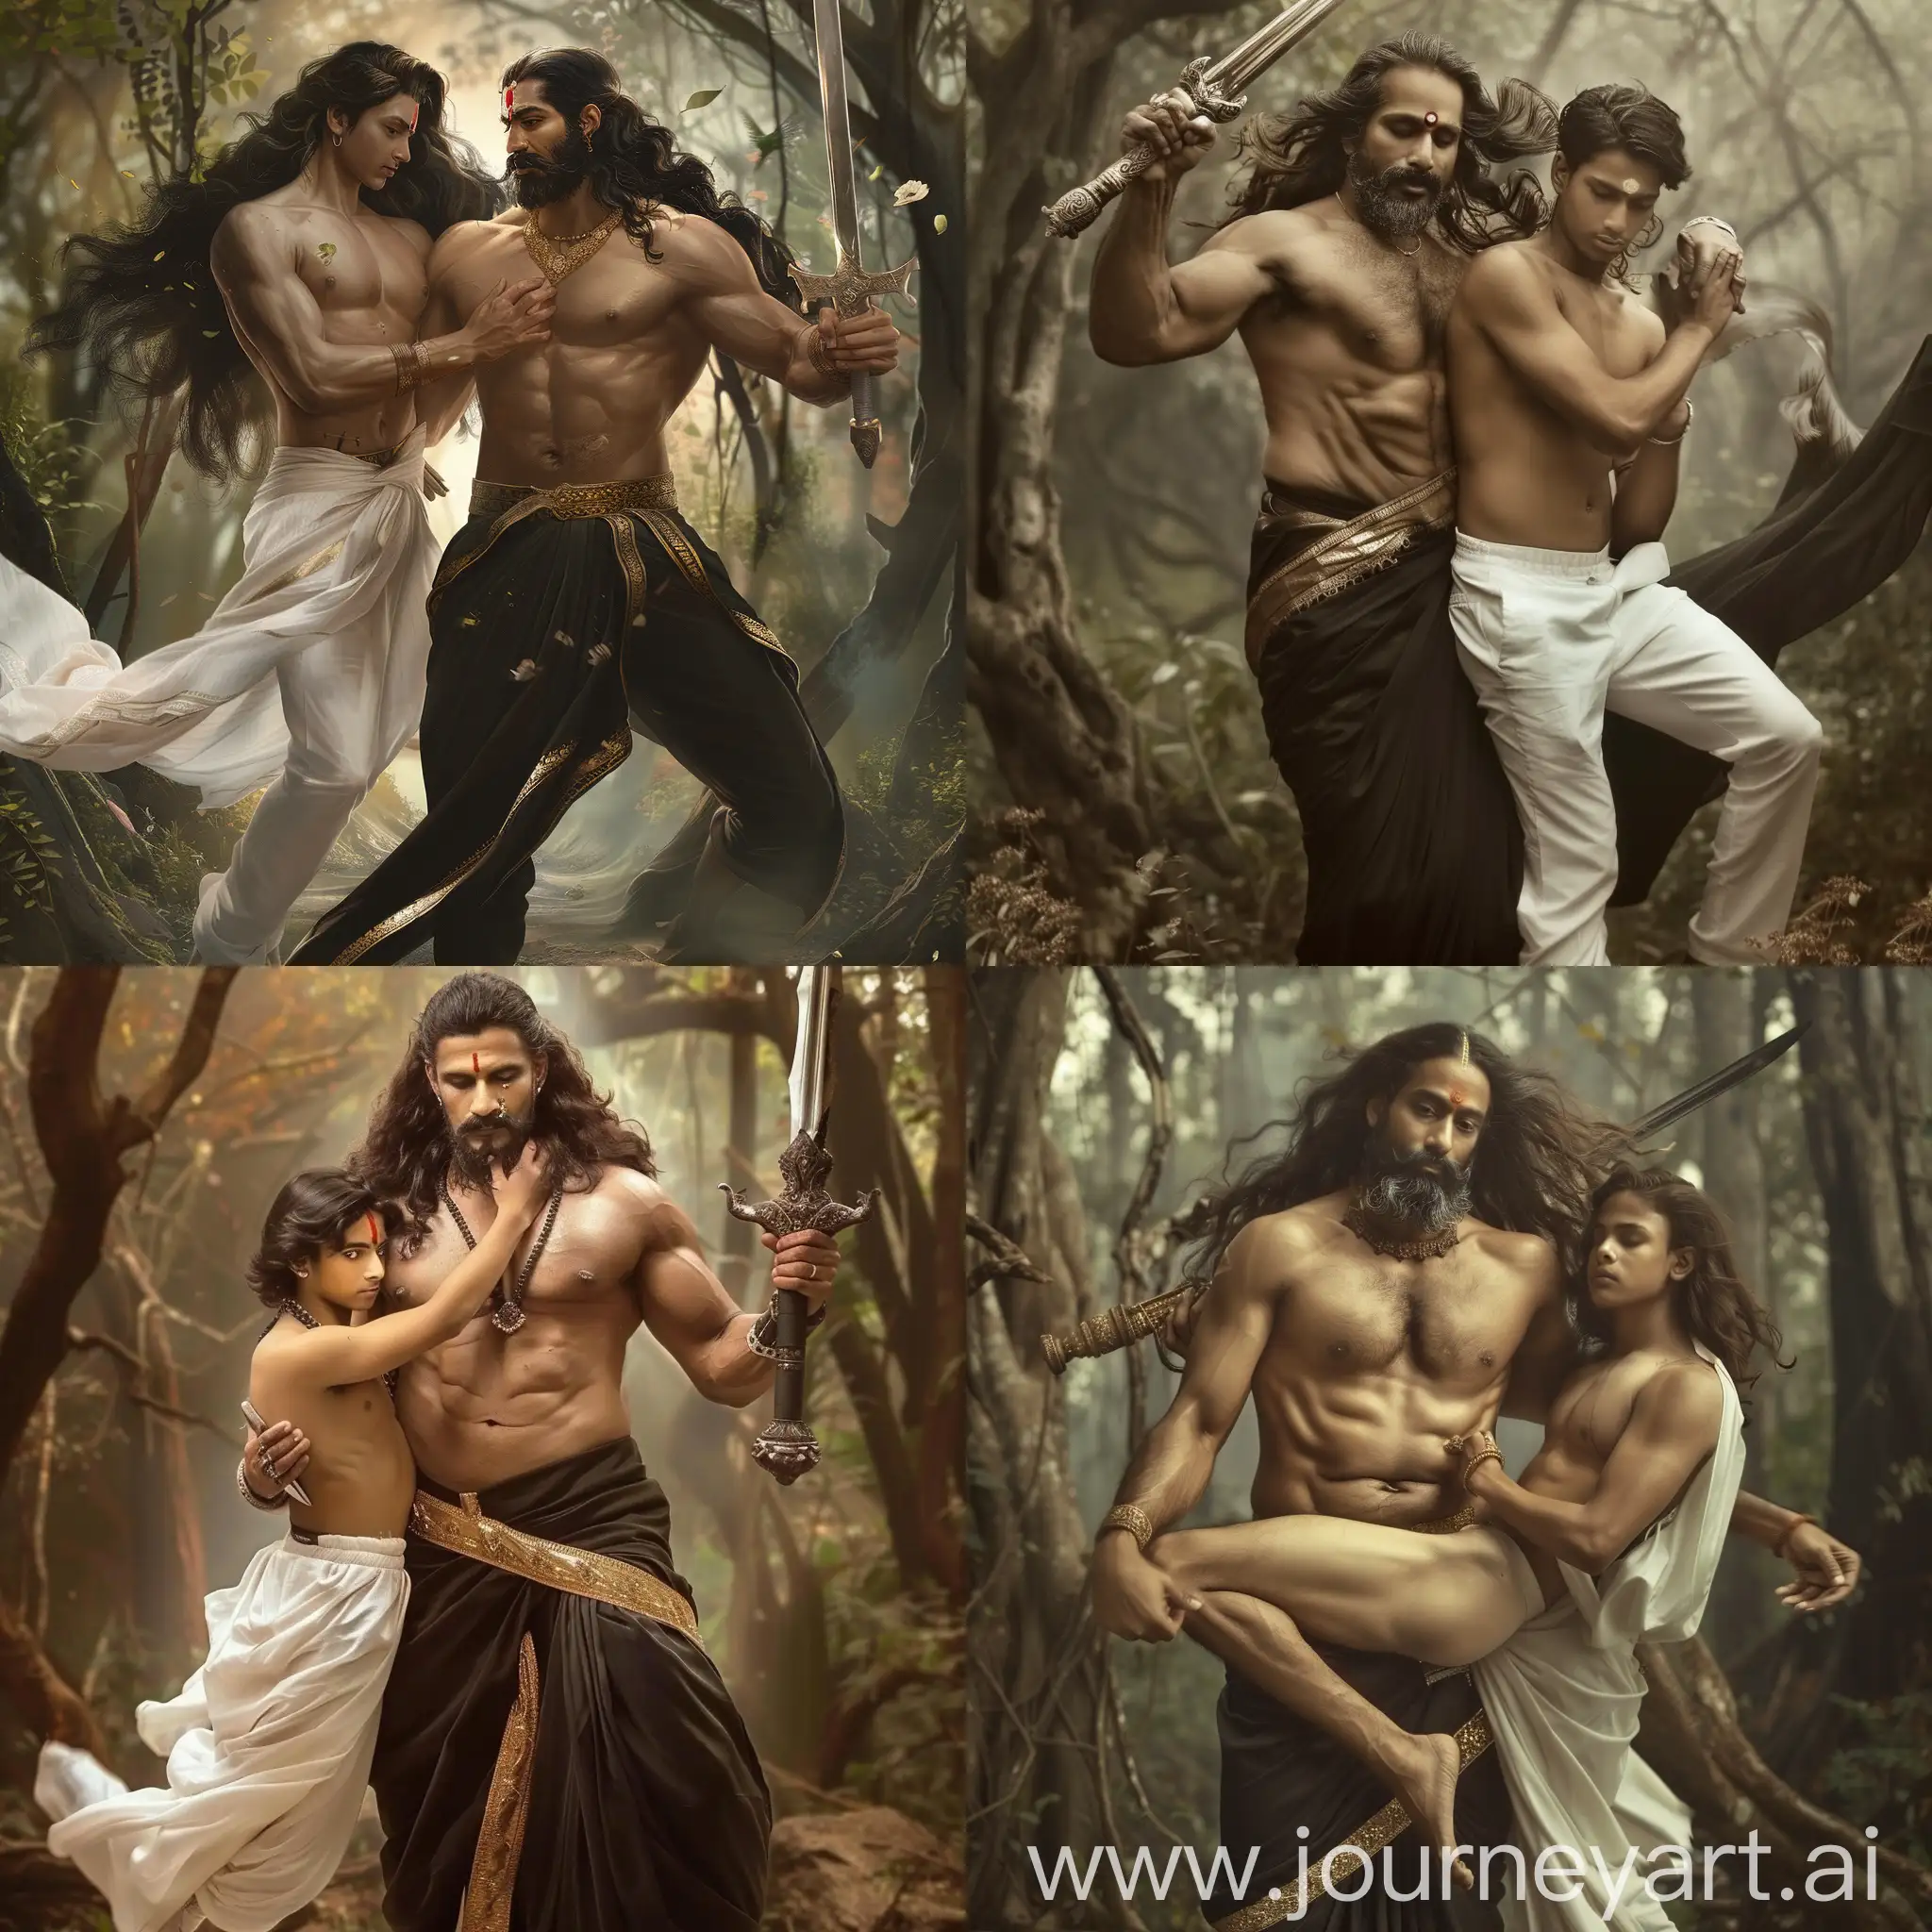 Ancient handome South Indian man, he is very masculine, wearing only a body hugging black dhothi with golder boarder, he have long her, upper body part is completely bare, he has beared and mustace, he has sword in one hand, and he is affectinately holding a young man who is wearing white pants  and  shirt looking modern 25 year old, they are in a forest, dress is flowing in wind. 